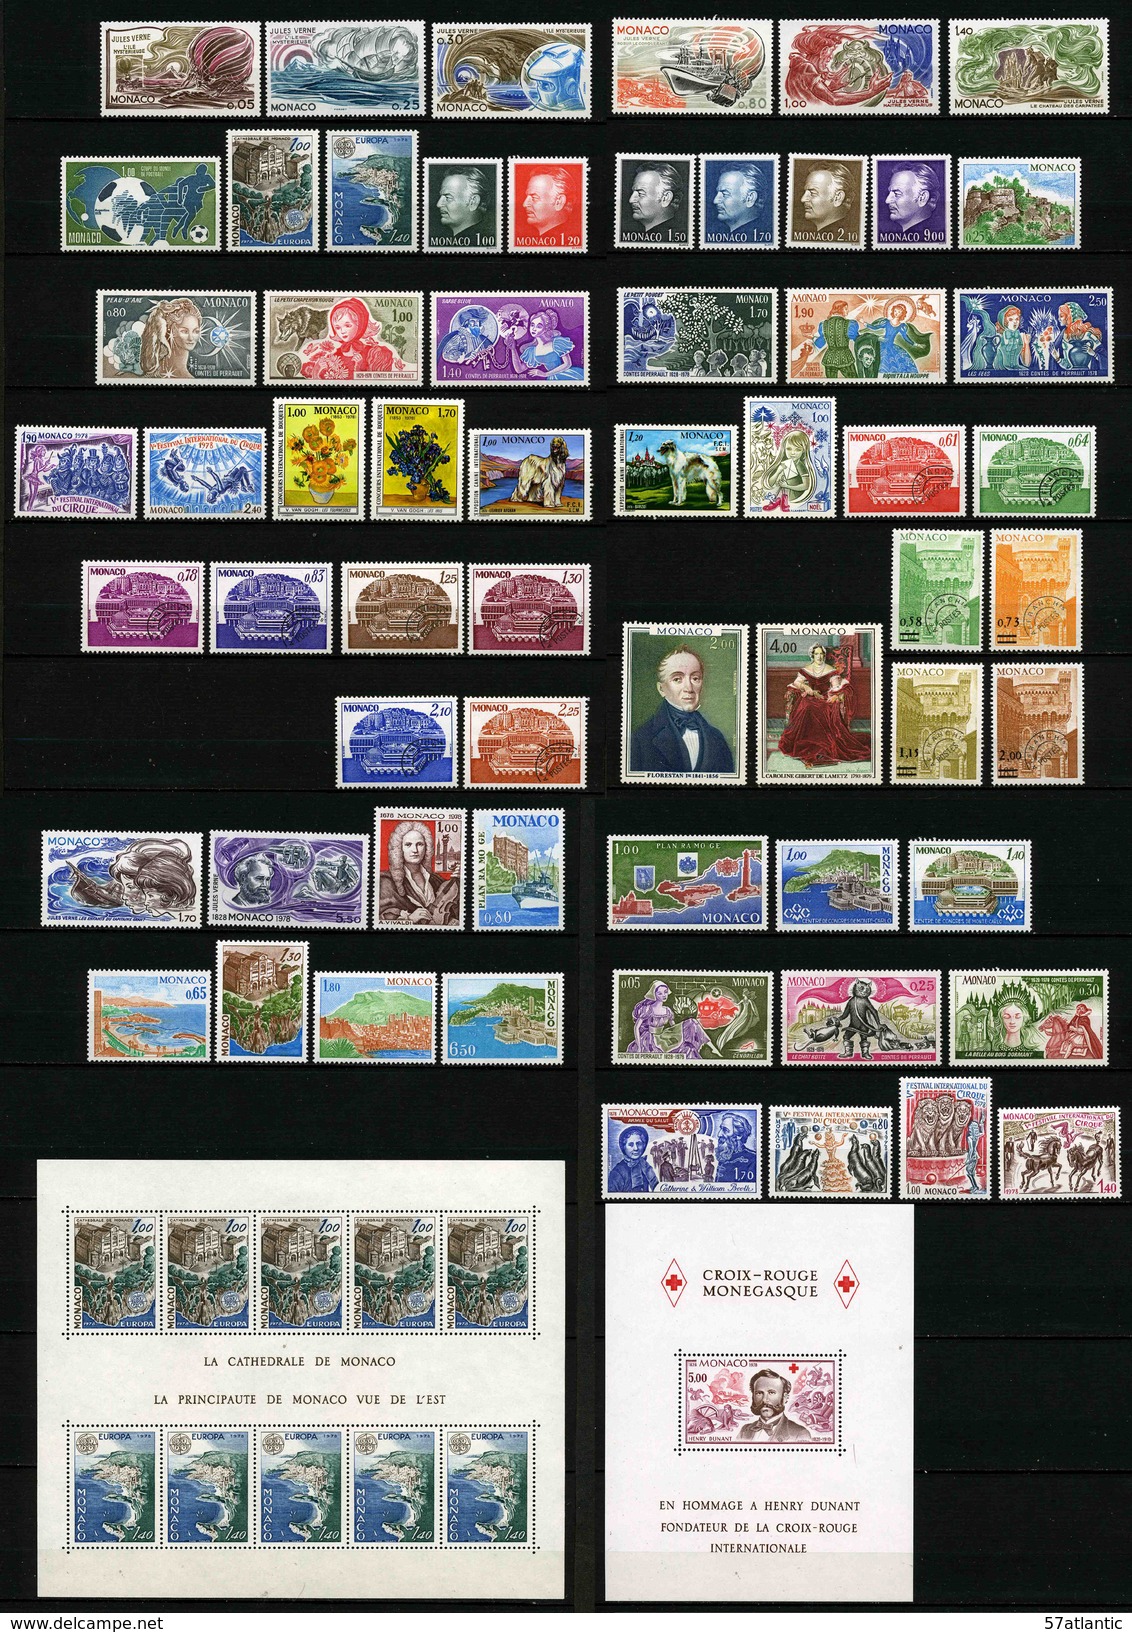 MONACO - ANNEE COMPLETE 1978 - YT 1125 à 1173 + PREO 50 à 61 + BF 14 Et 15 ** -  61 TIMBRES NEUFS ** + 2 BLOCS NEUFS ** - Full Years